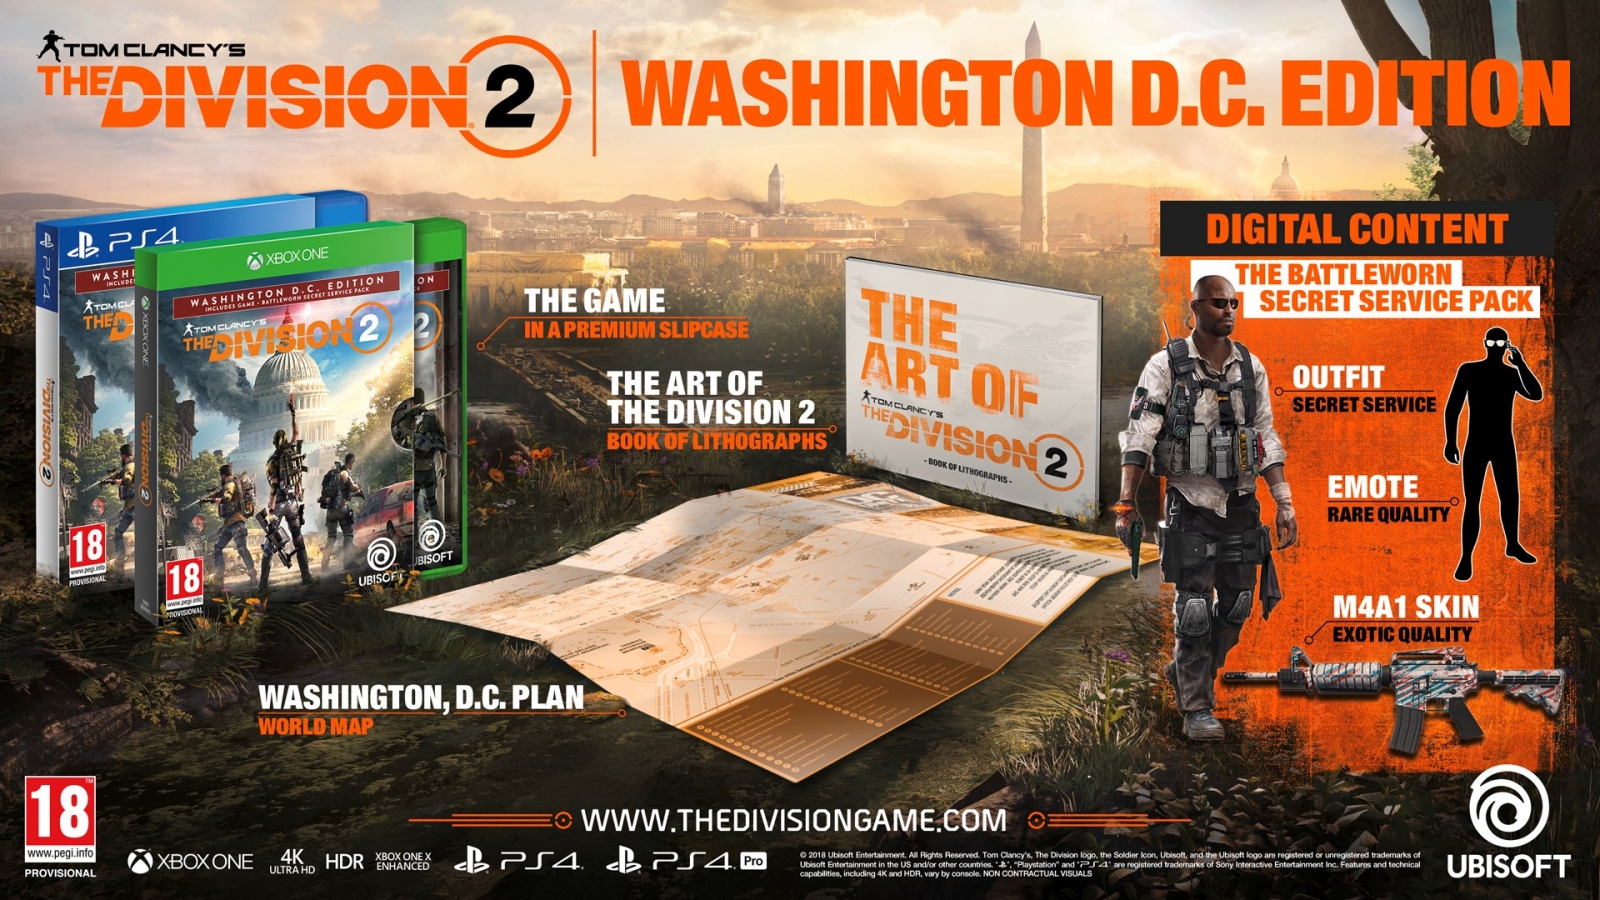 Ps4 Tom Clancy S The Division 2 Washington D C Edition Ubisoft Tooted Gamestar